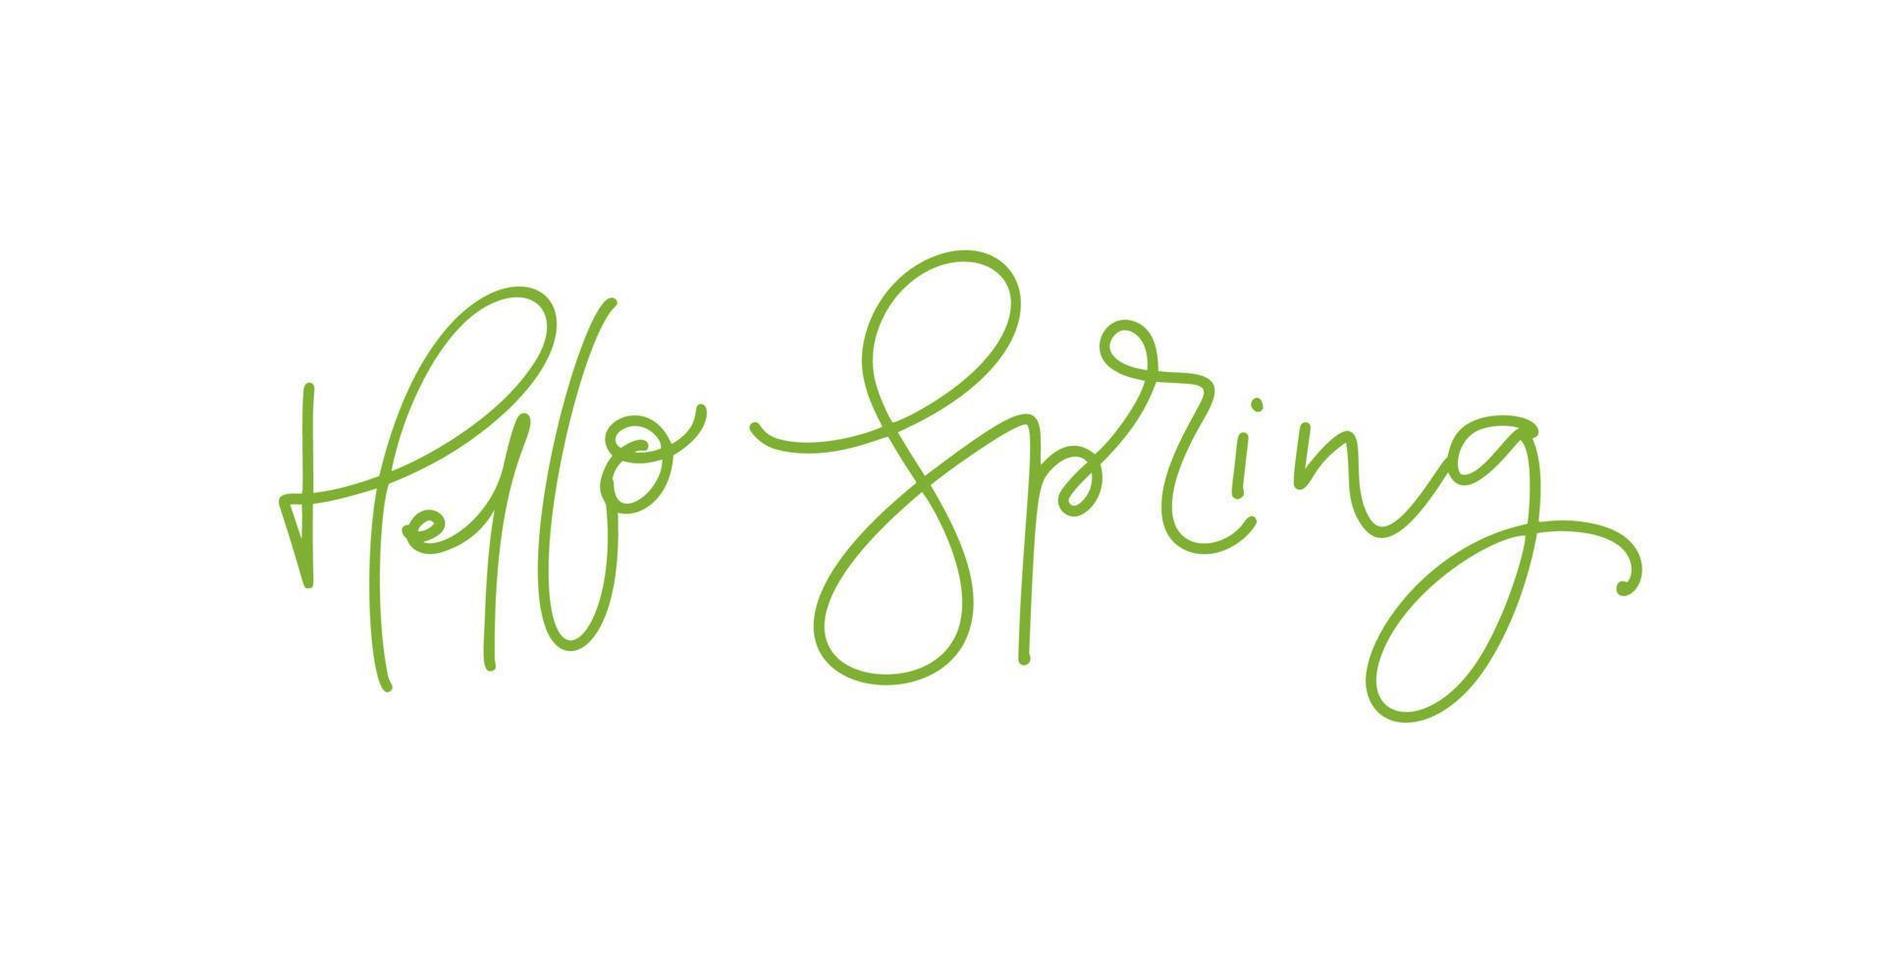 Hand drawn vector green monoline text Hello Spring. Motivational and inspirational season quote. Calligraphic card, mug, photo overlays, flyer, poster design